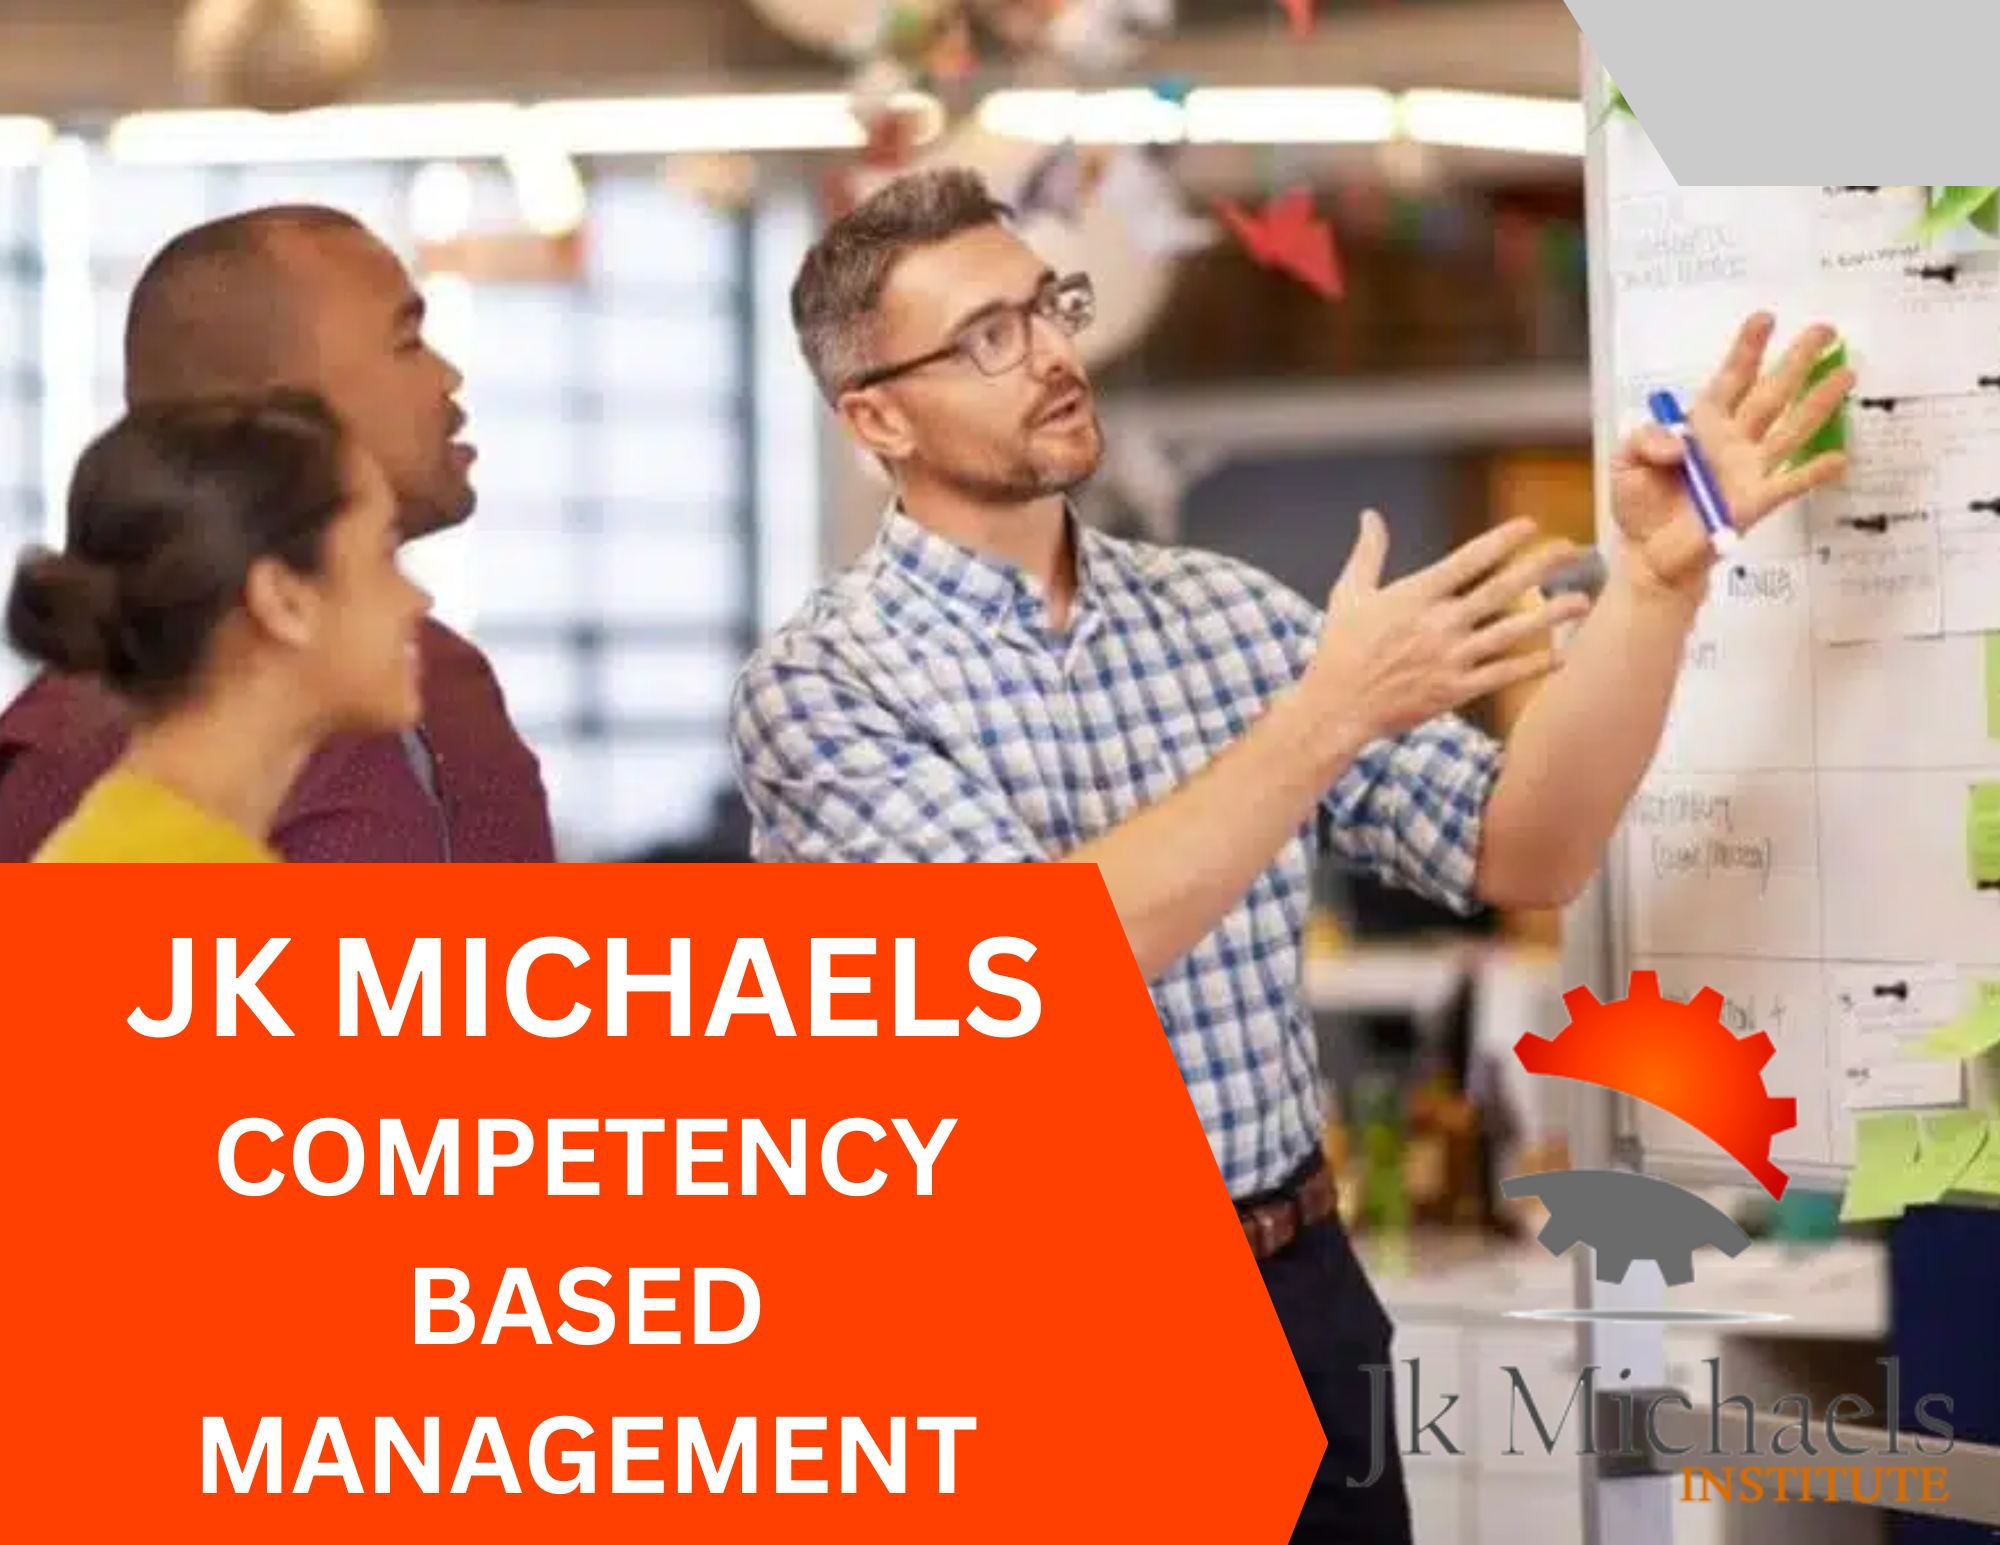 COMPETENCY BASED MANAGEMENT